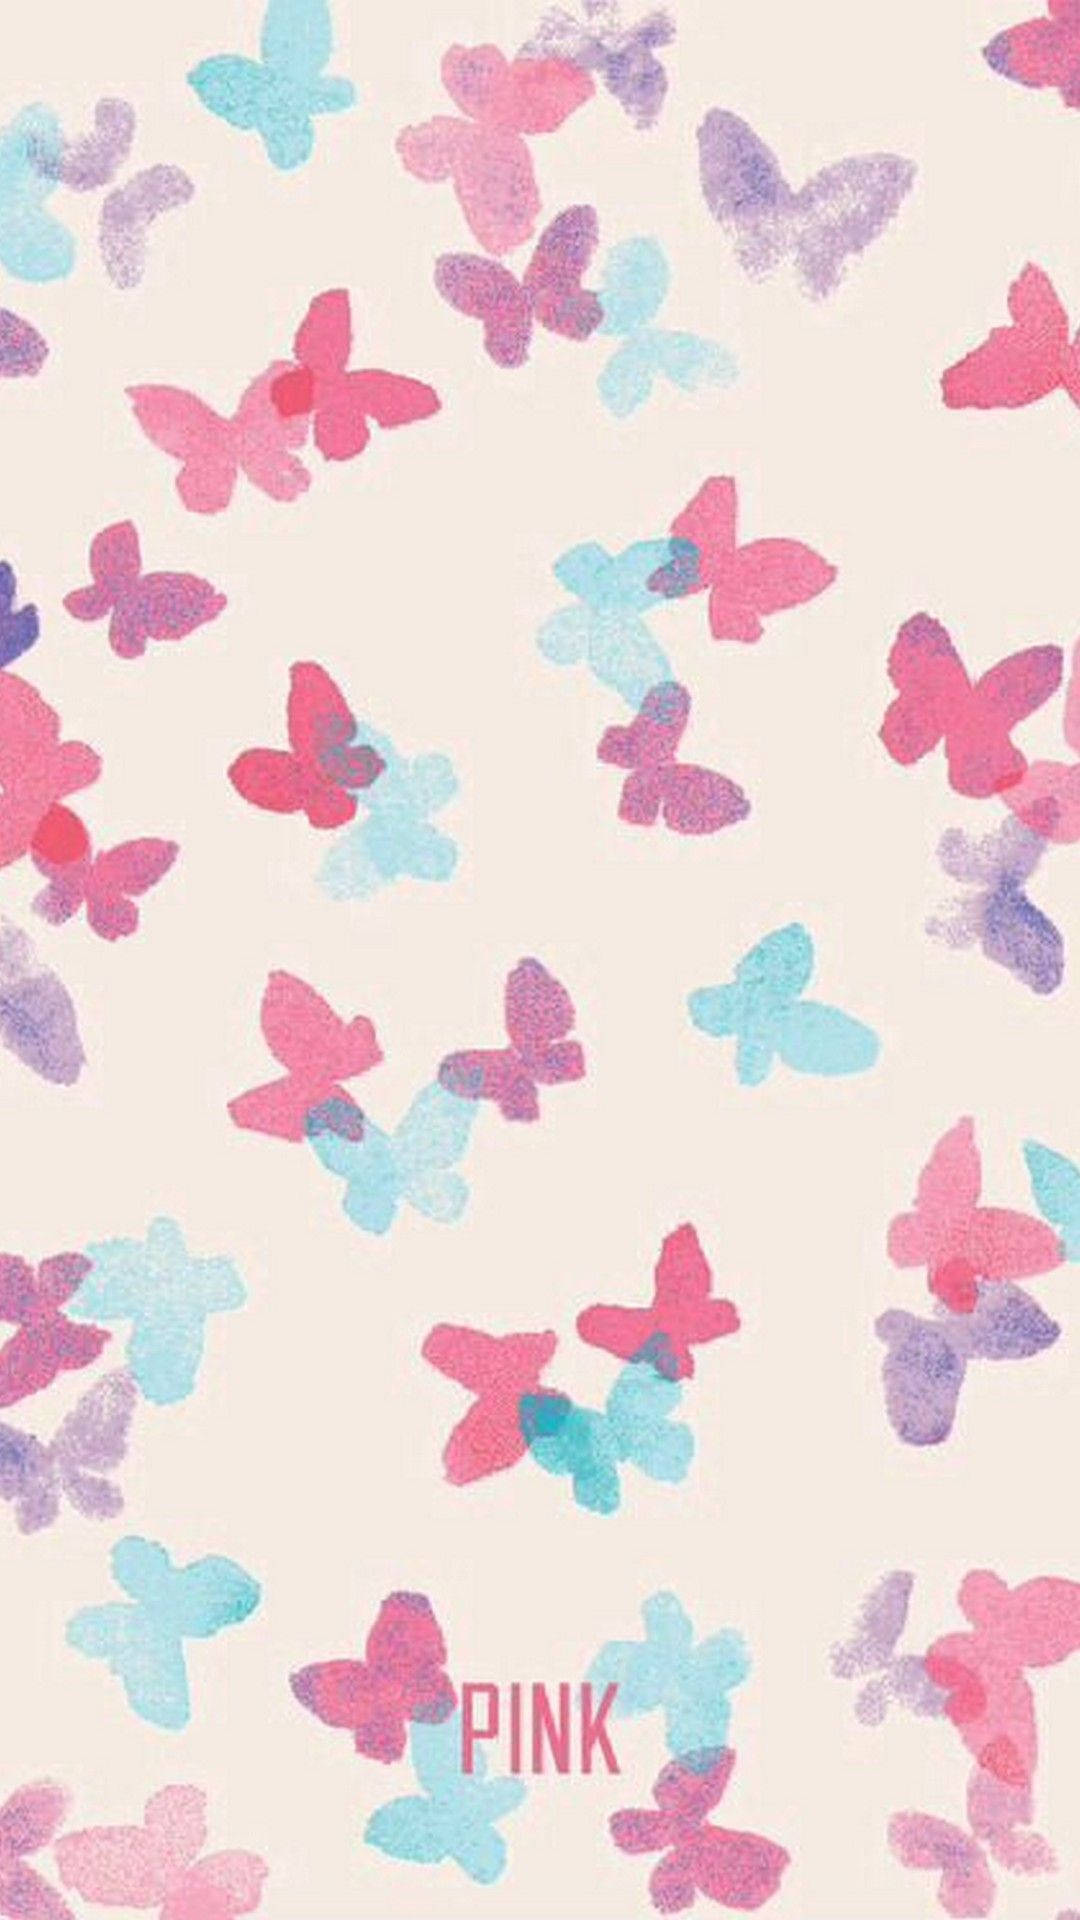 Aesthetic Girly Multicolored Butterflies